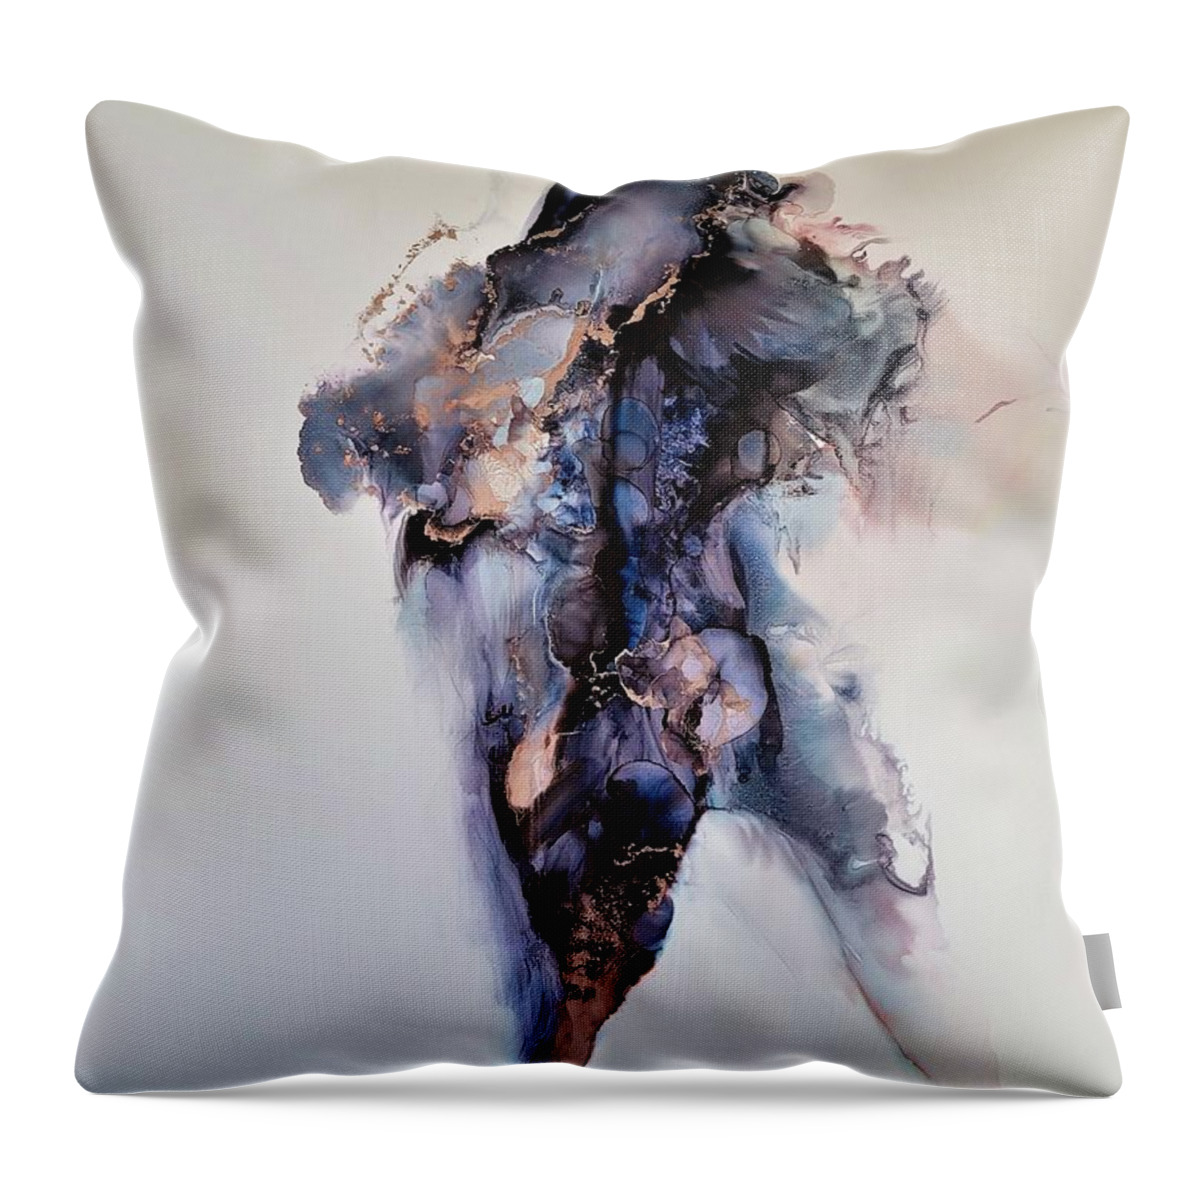 Human Throw Pillow featuring the painting The Struggle Within by Angela Marinari